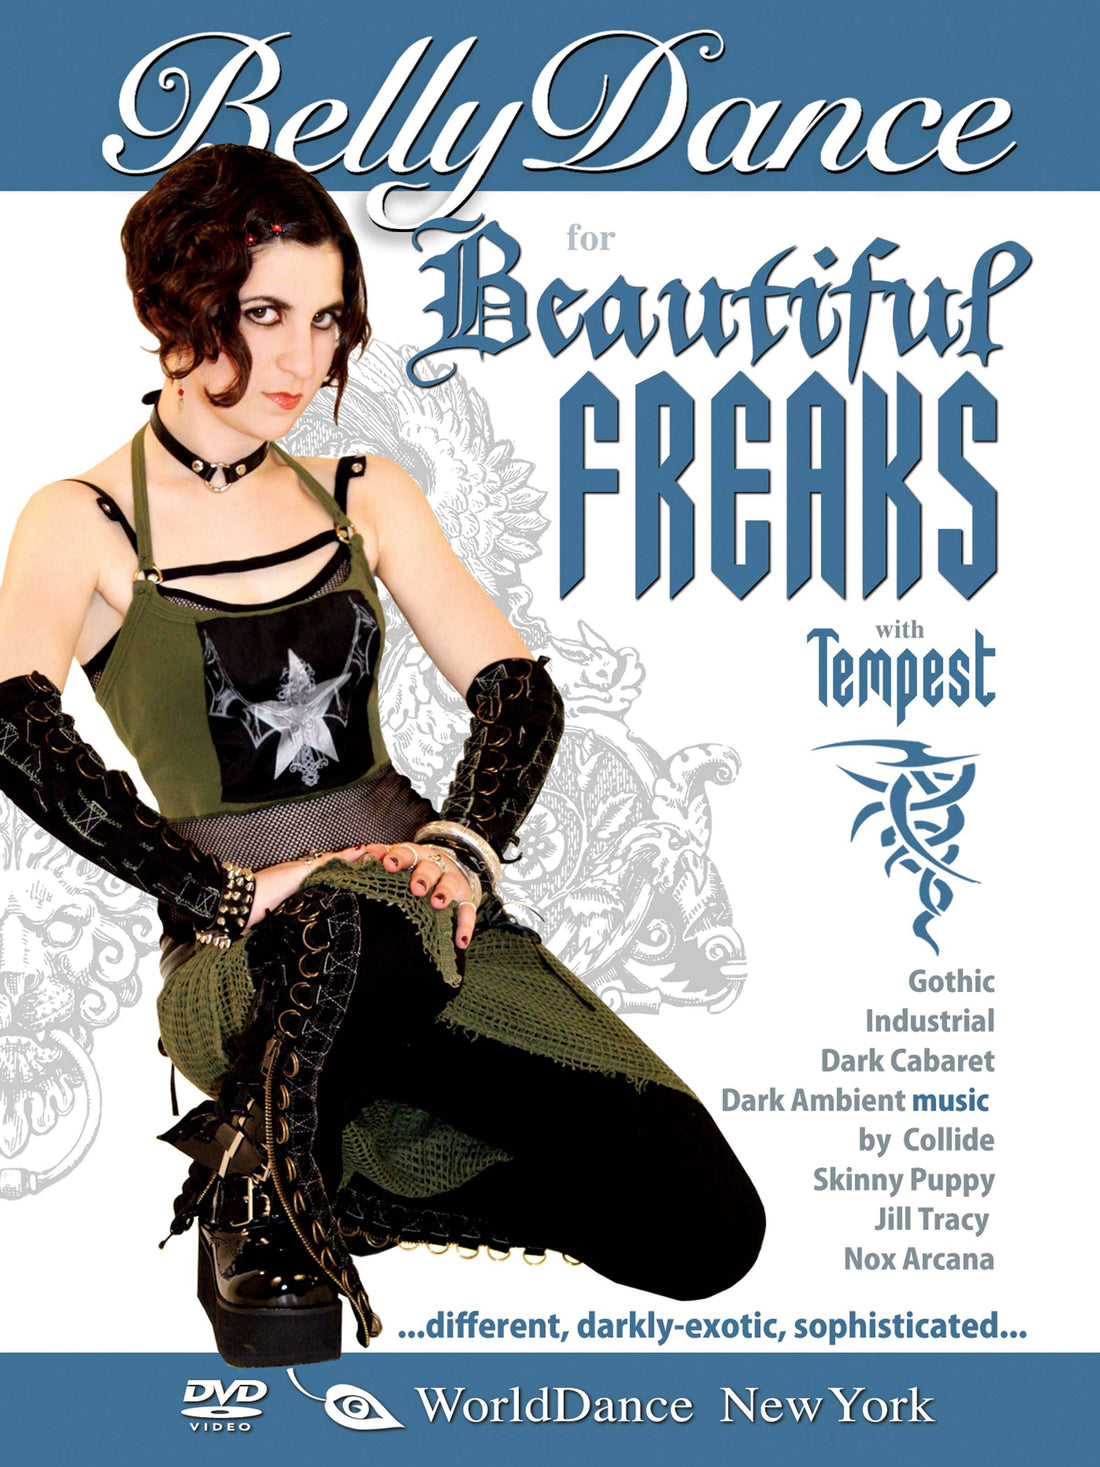 "Bellydance for the Beautiful Freaks, Gothic Belly Dance" DVD - World Dance New York